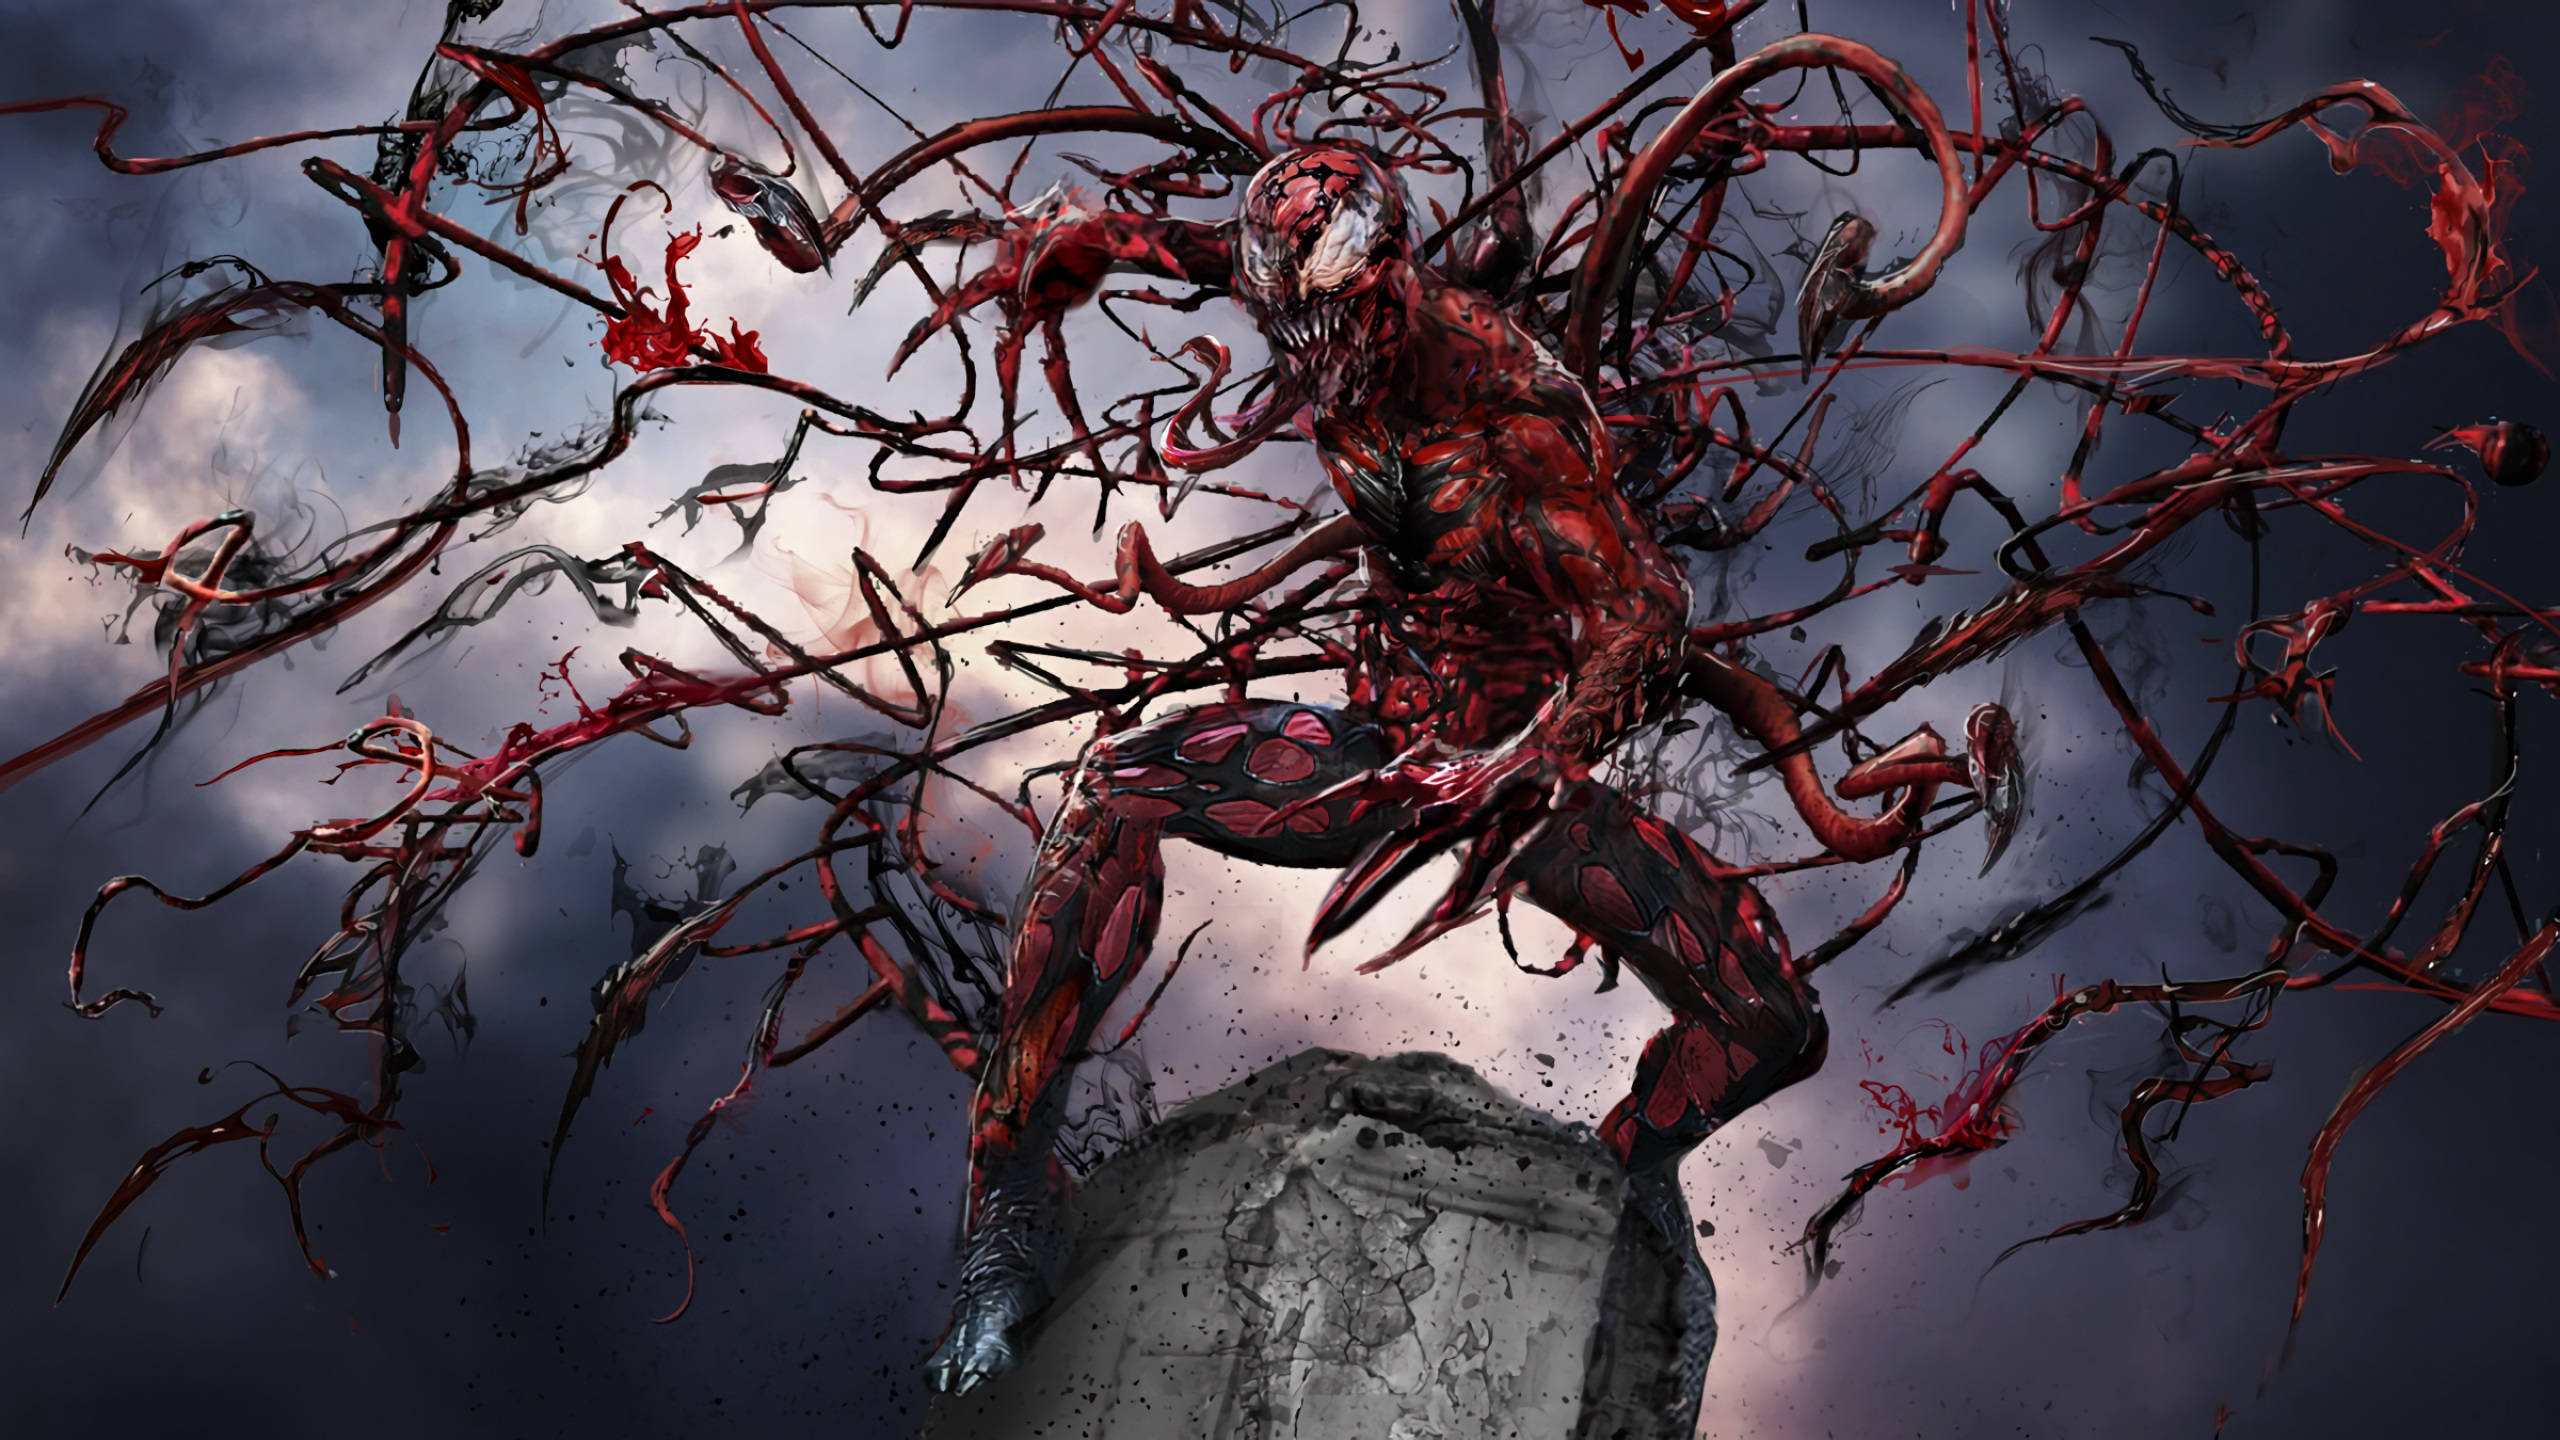 2560x1440 Marvel Carnage Horror Aesthetic Picture